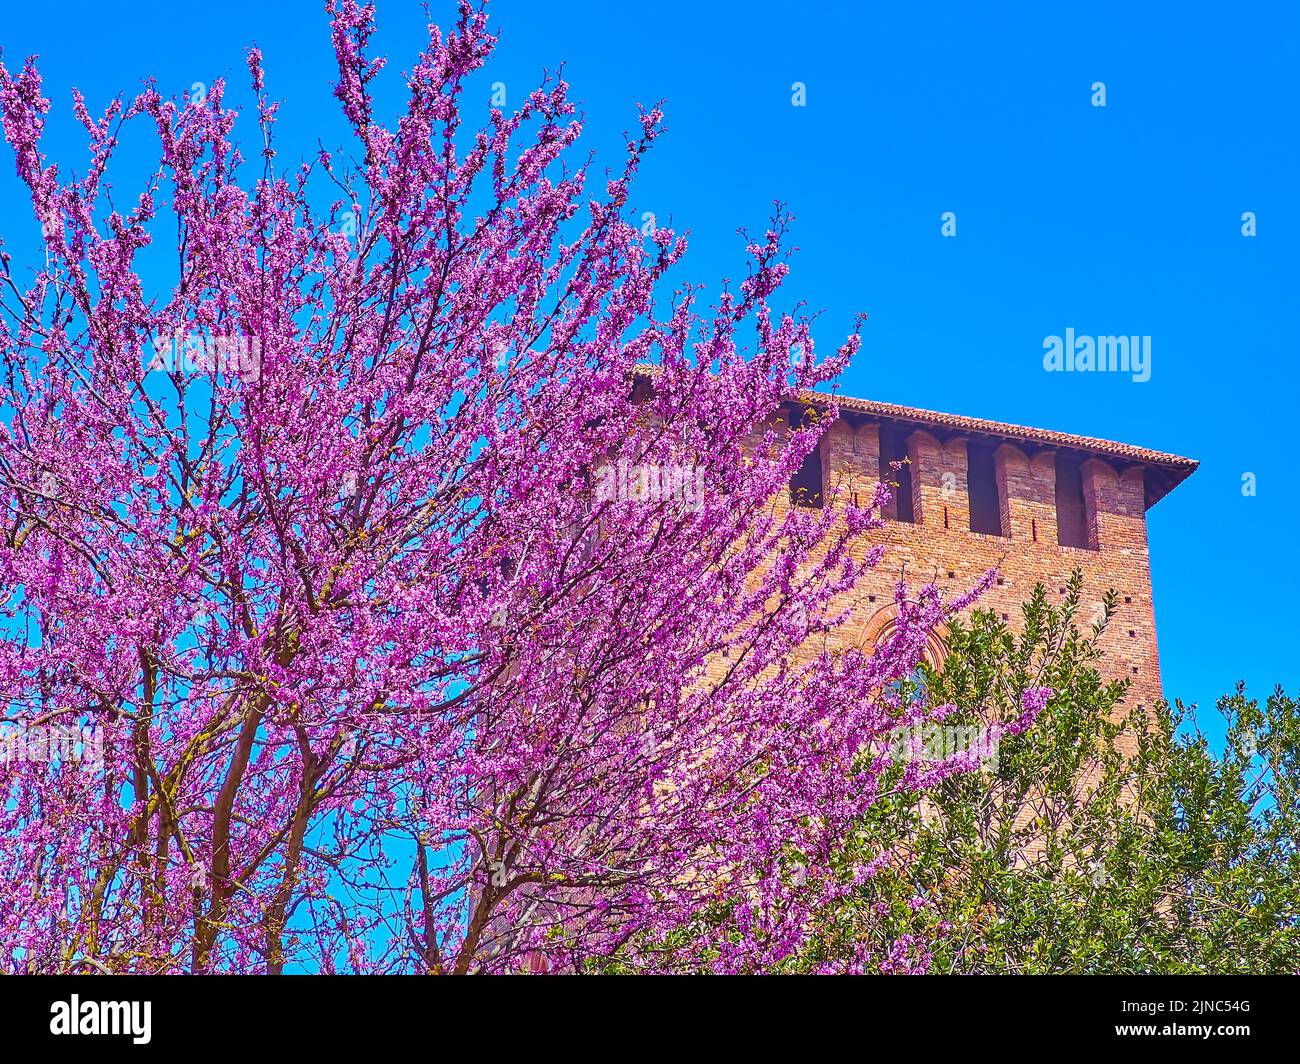 The closeup of bright pink flowers of Cornus Florida tree in front of the brick wall of Visconti Castle, Pavia, Italy Stock Photo